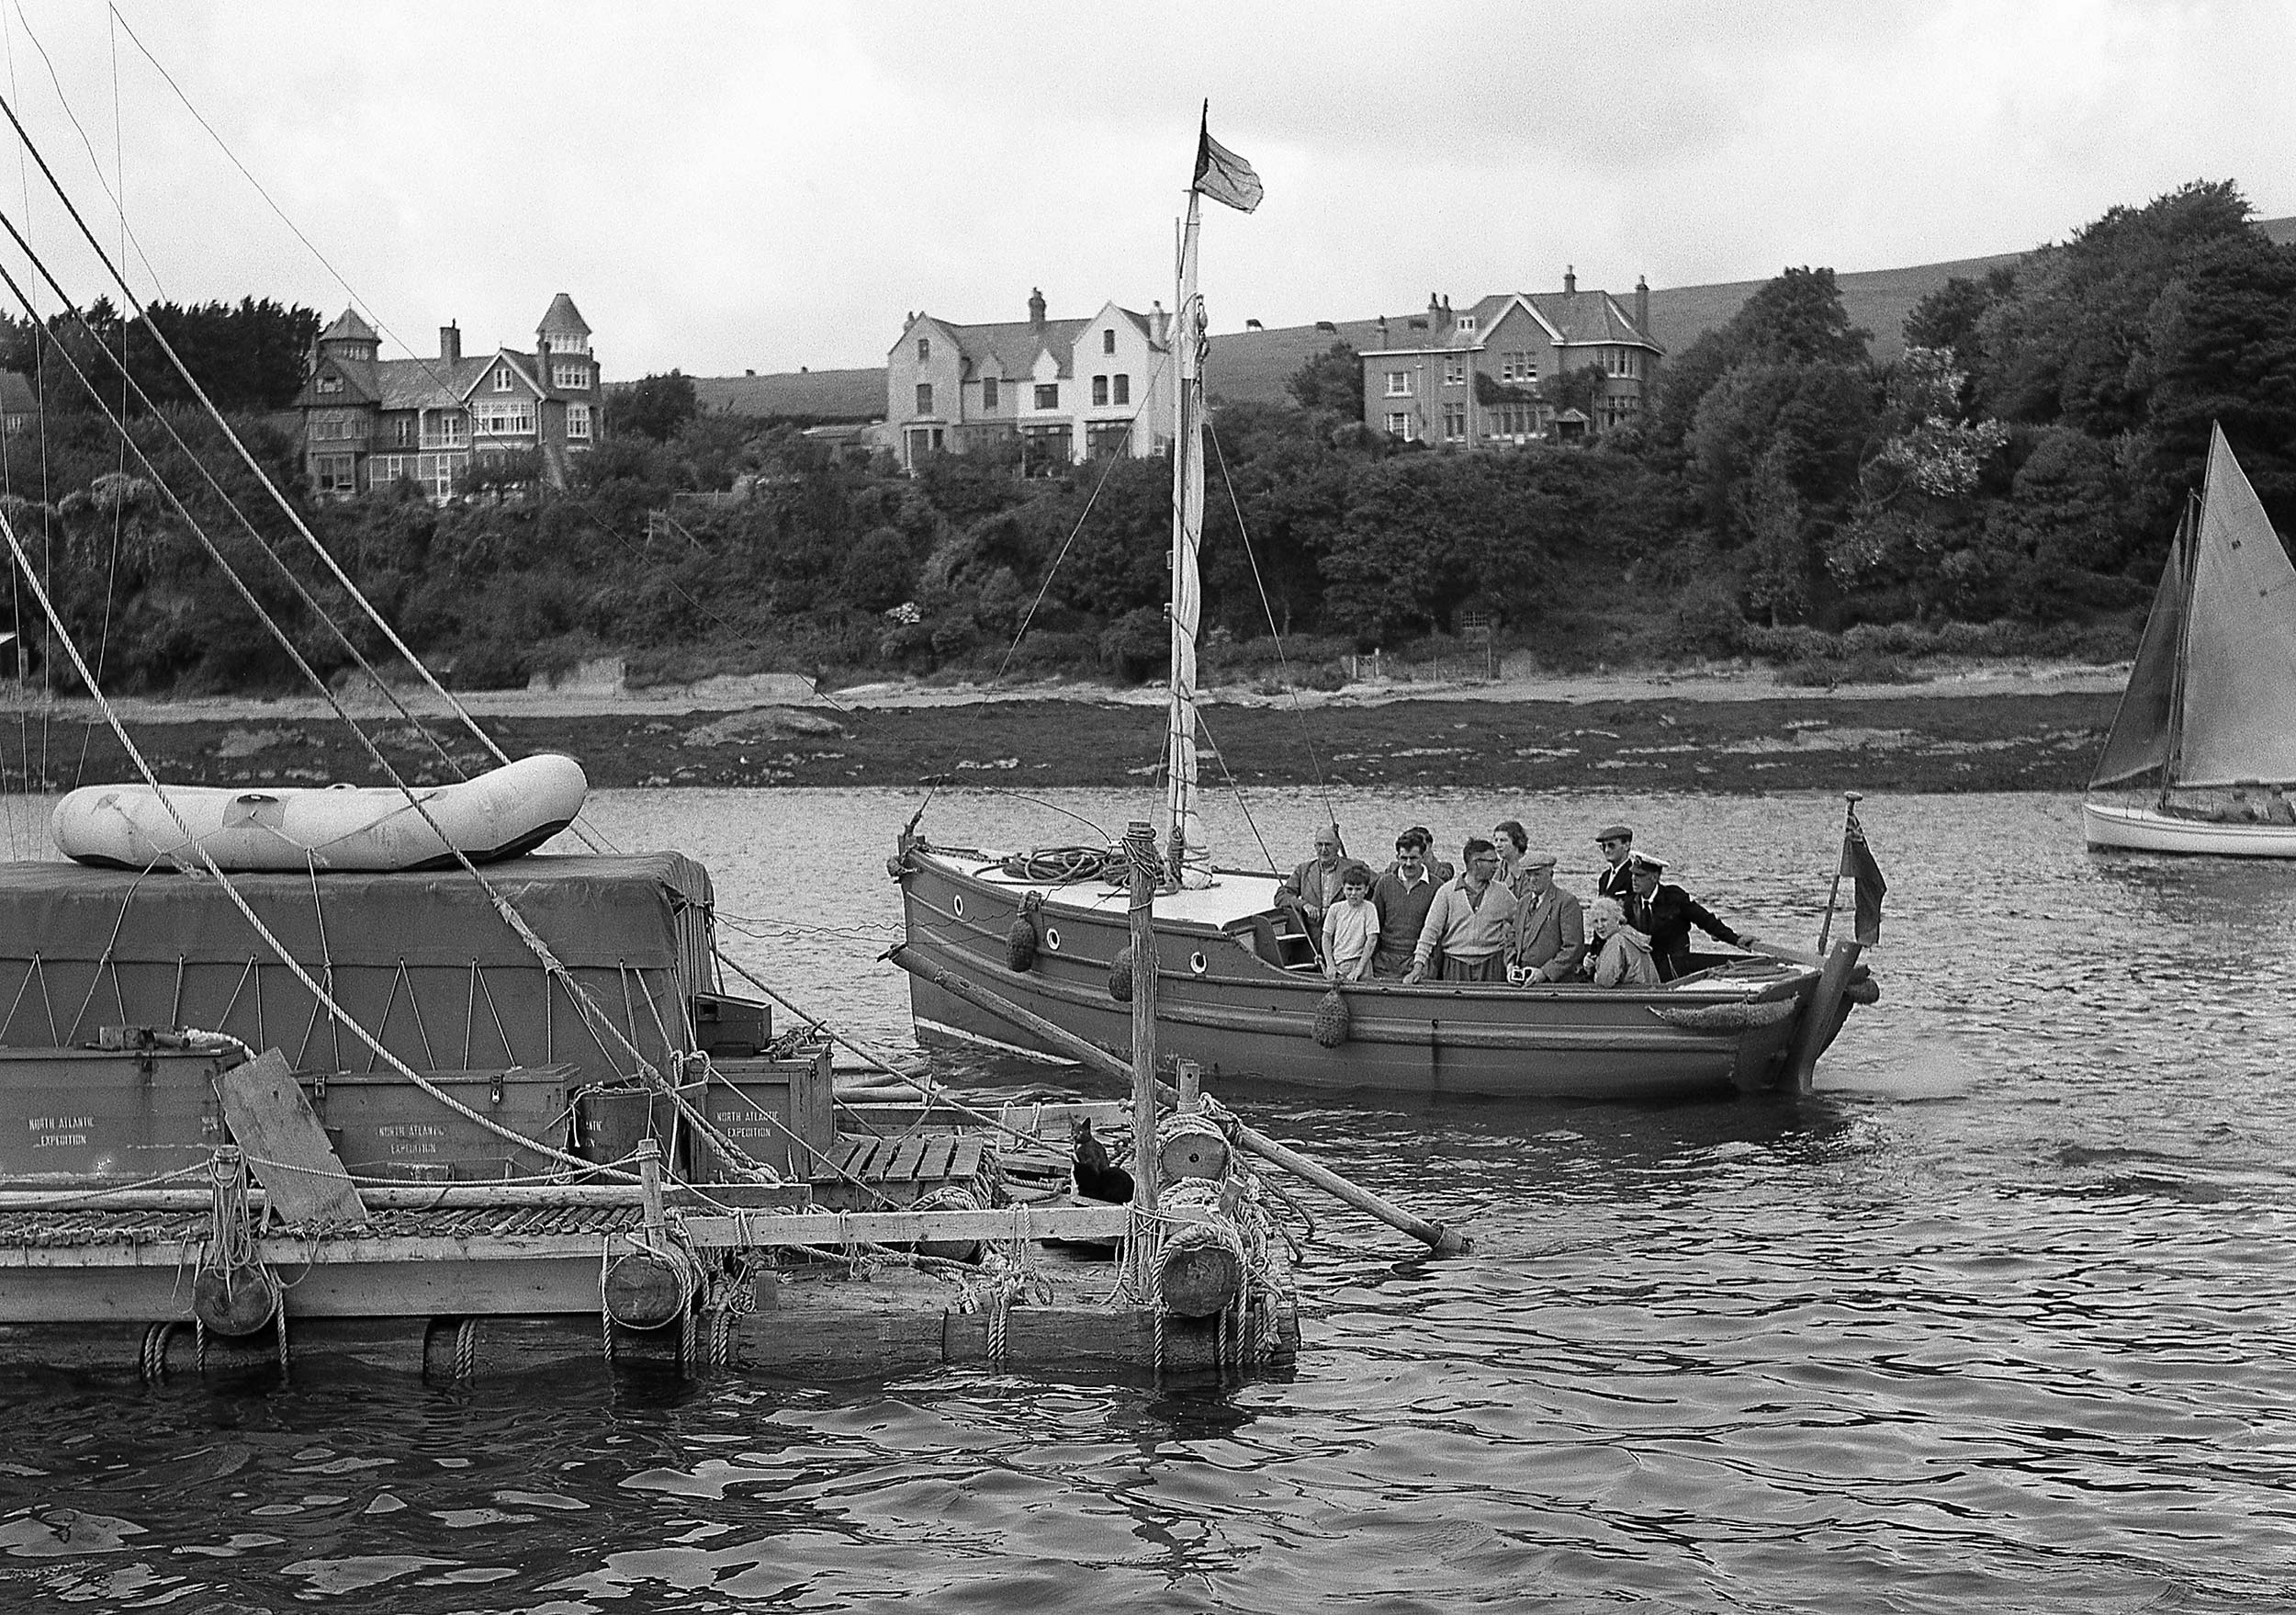 Black and white photo of the L'Egare and a boat carrying people who have come to have a look at it.